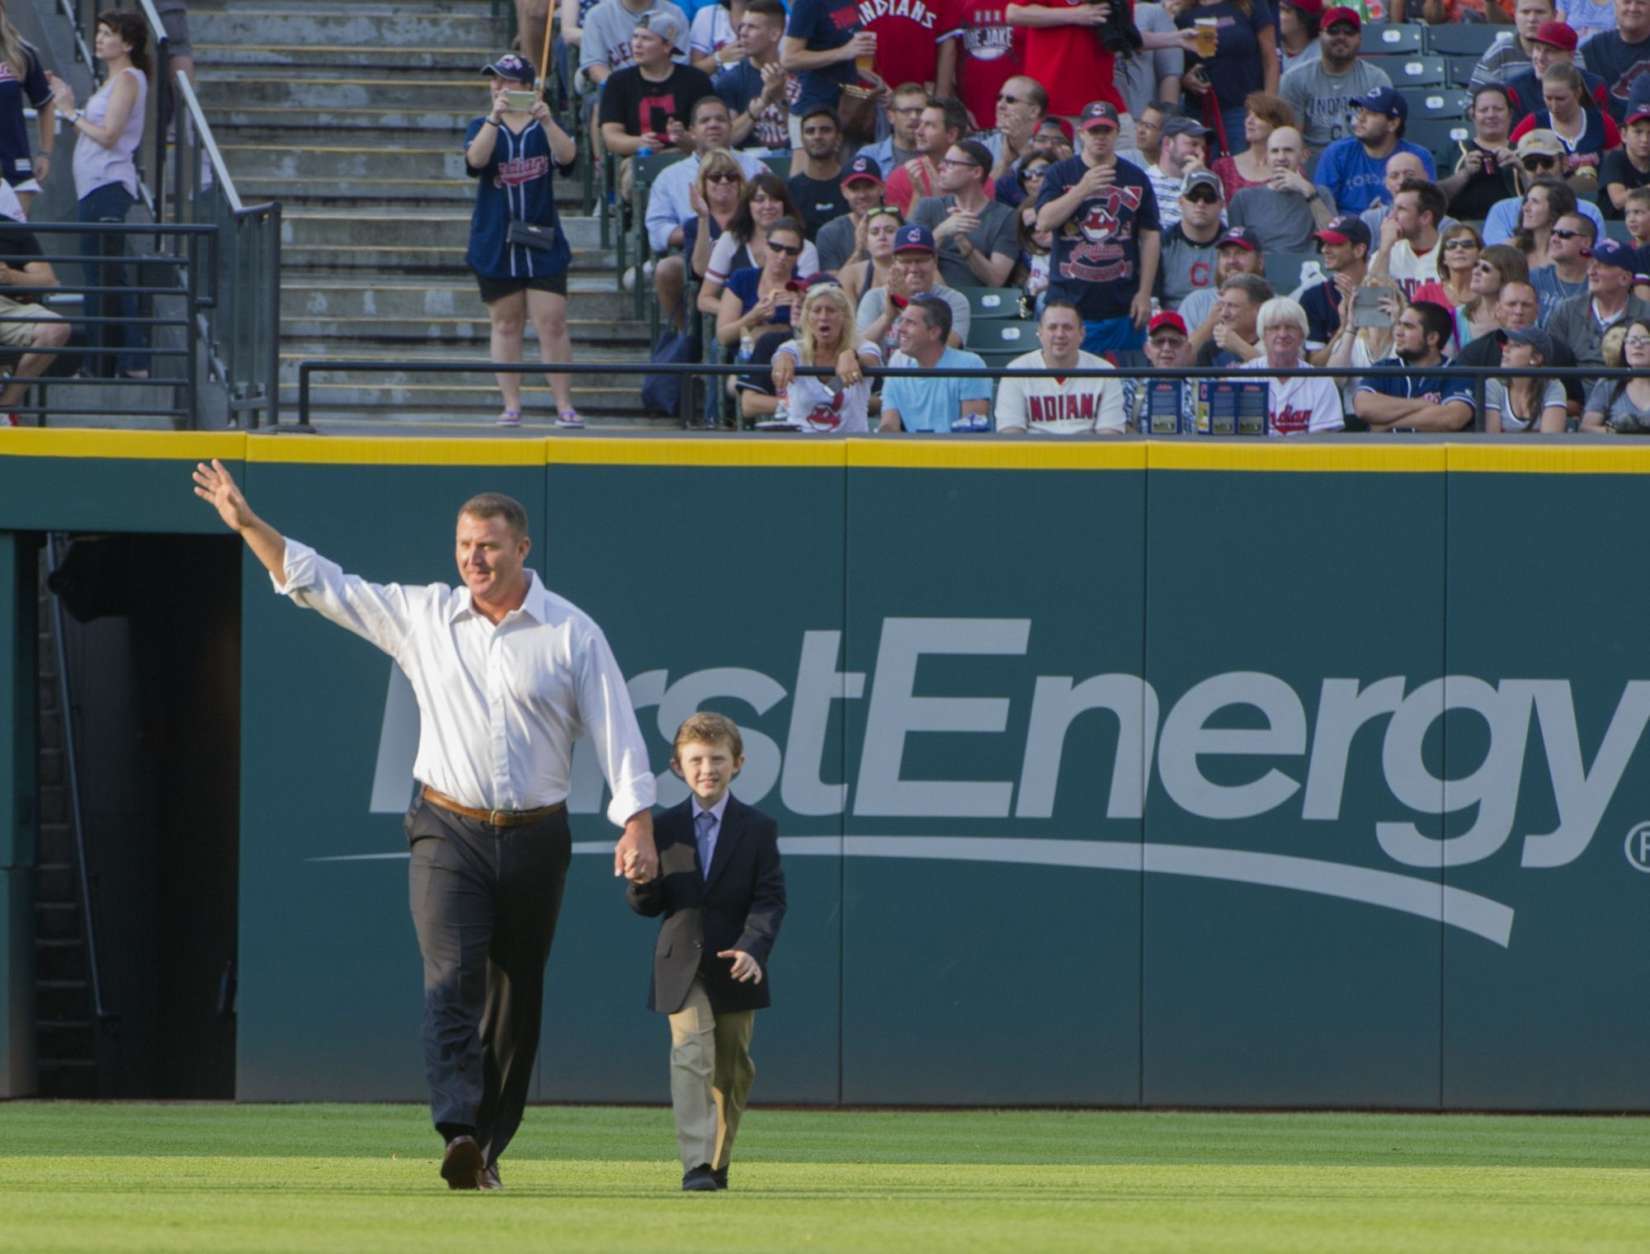 Former Cleveland Indians great Jim Thome walks to his Indians Hall of Fame ceremony with his son Landon, before a baseball game against the Oakland Athletics in Cleveland, Saturday, July 30, 2016. (AP Photo/Phil Long)